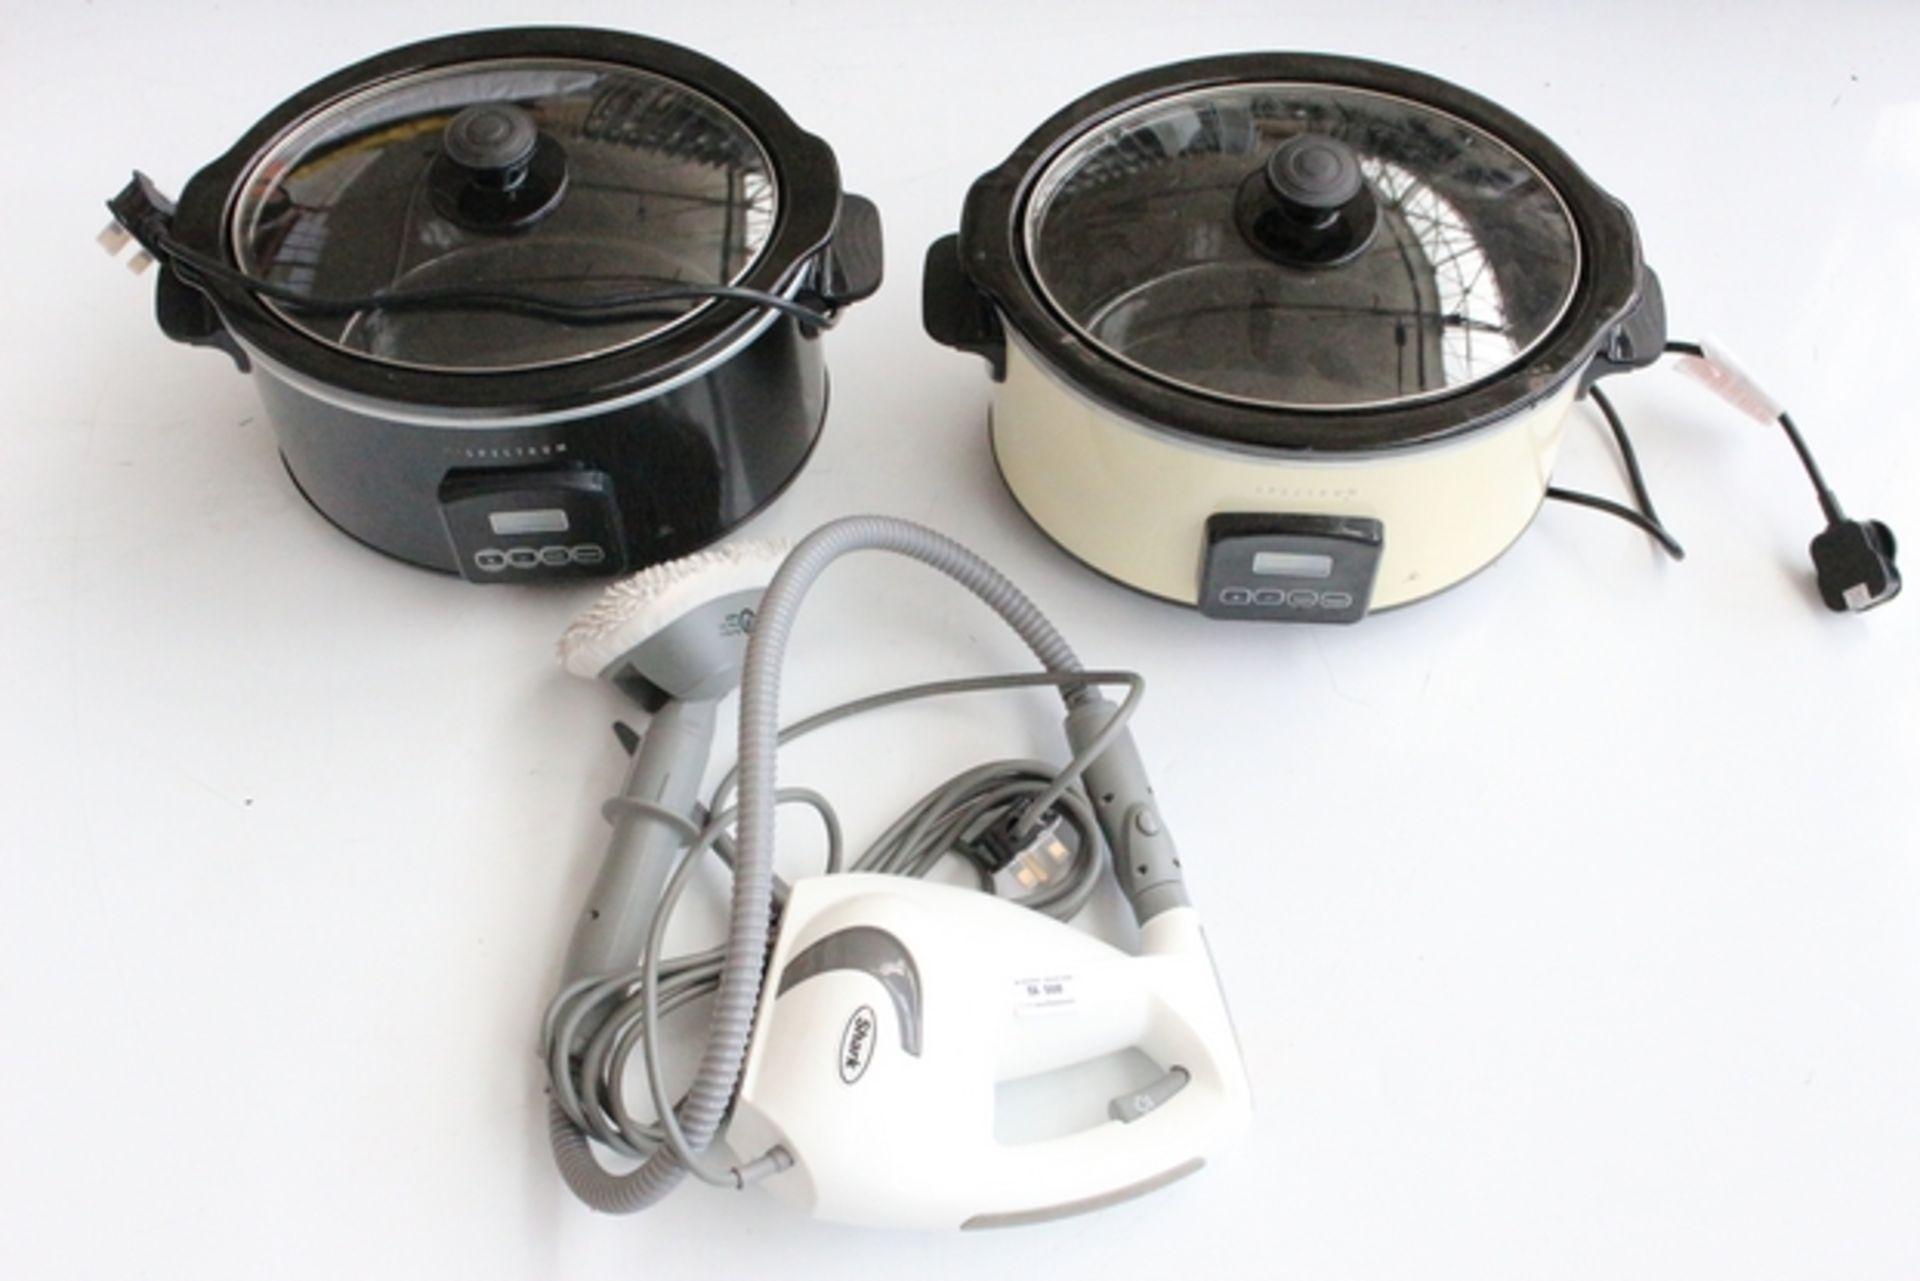 1X LOT TO CONTAIN 3 ITEMS TO INCLUDE SLOW COOKERS X2 AND A SHARK CLEANER X1 (DS-ATL) (05.07.17)